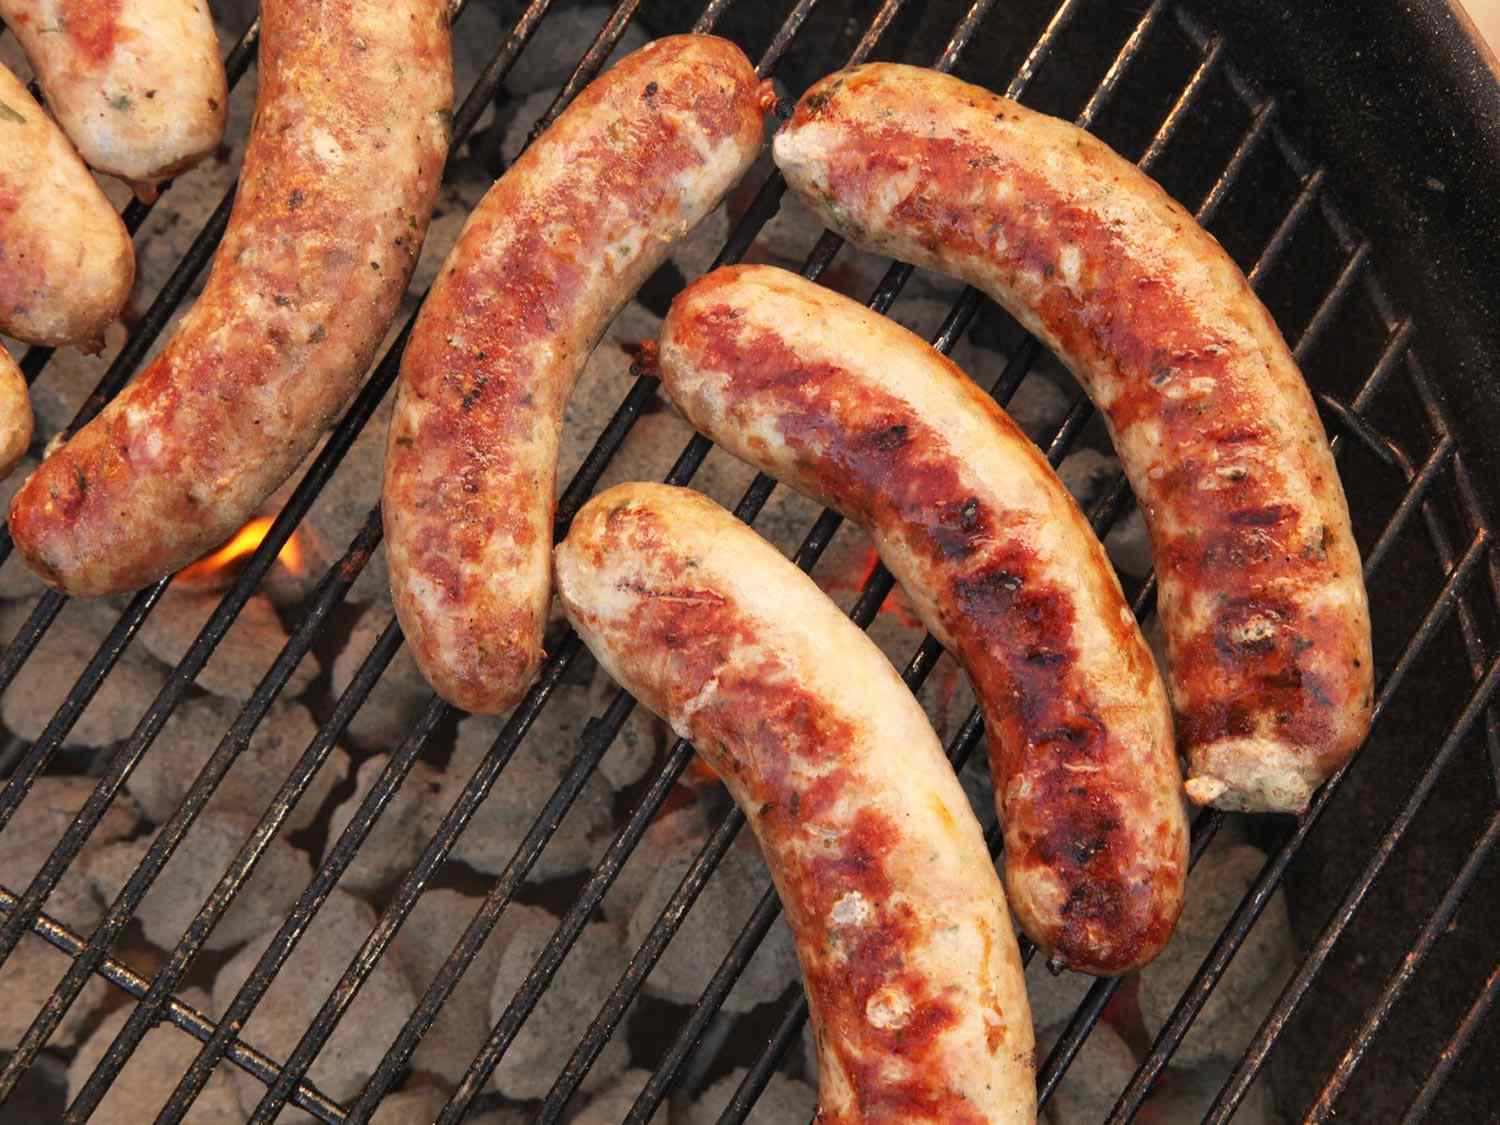 How Long to Cook Sausage on the Grill